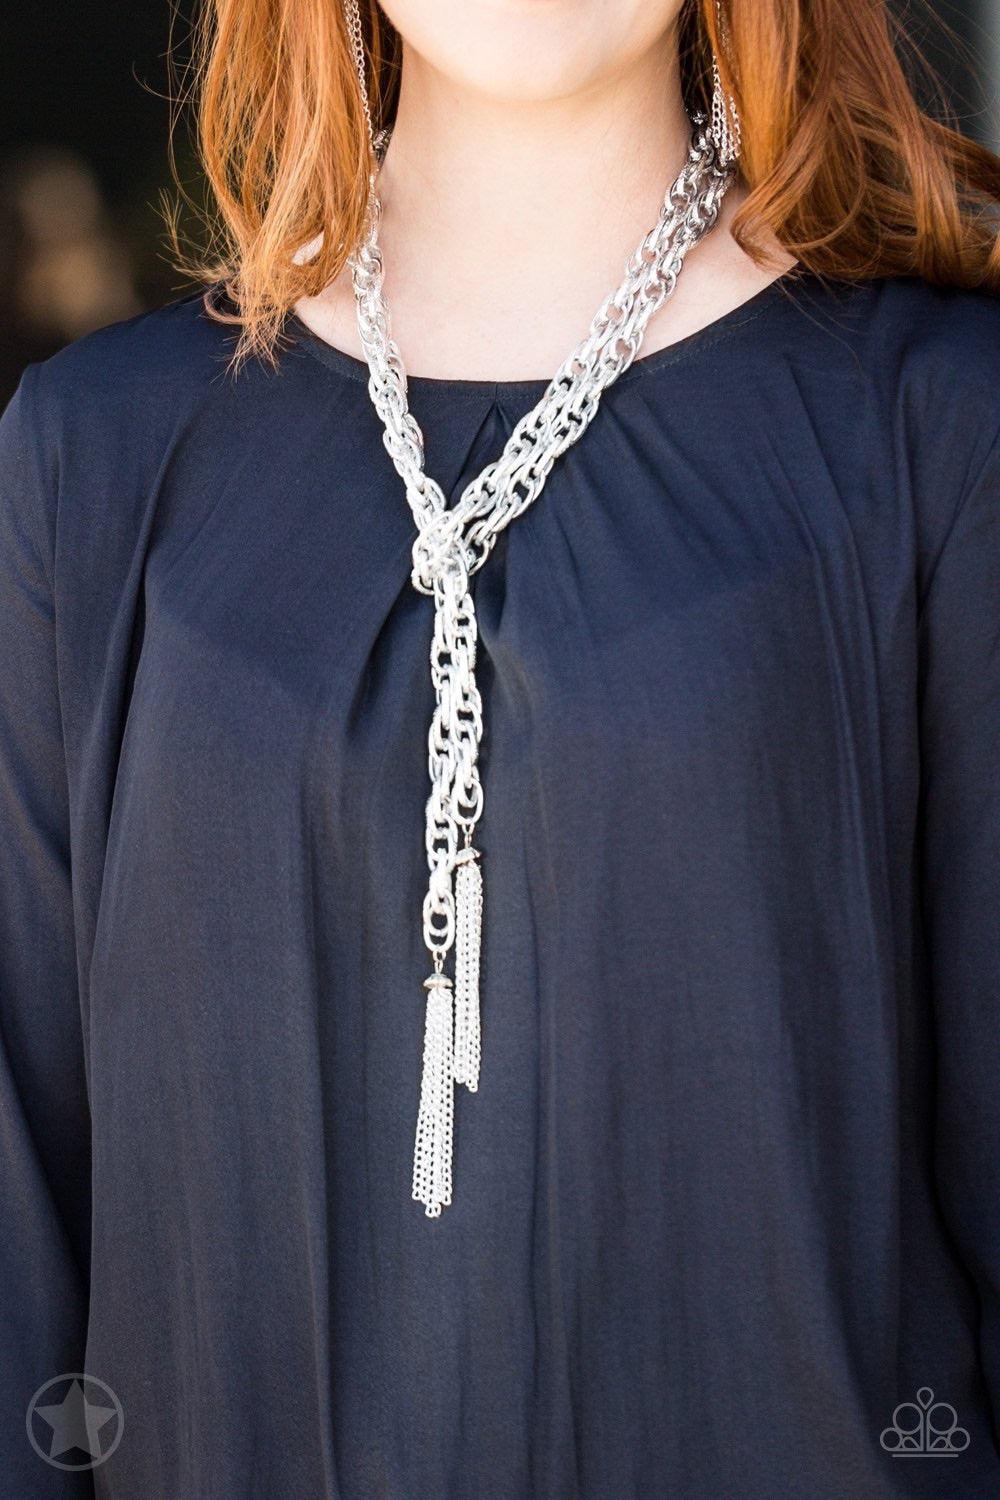 Paparazzi Accessories SCARFed for Attention - Silver A single strand of spiraling, interlocking links with light-catching texture is anchored by two tassels of chain that add dramatic length to the piece. Undeniably the most versatile piece in Paparazzi's